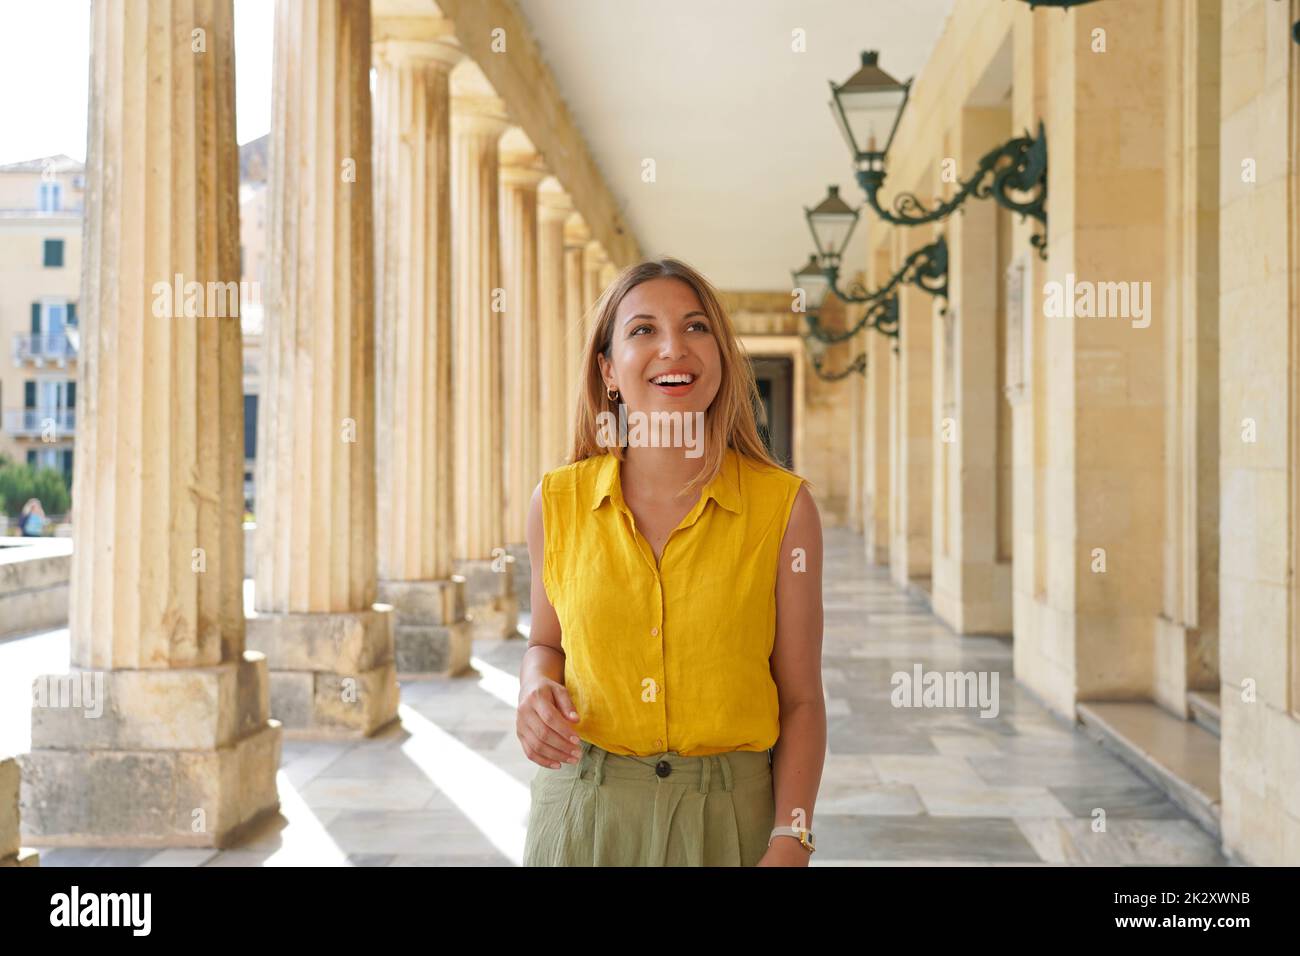 Portrait of young cheerful woman doing cultural tourism in Europe Stock Photo